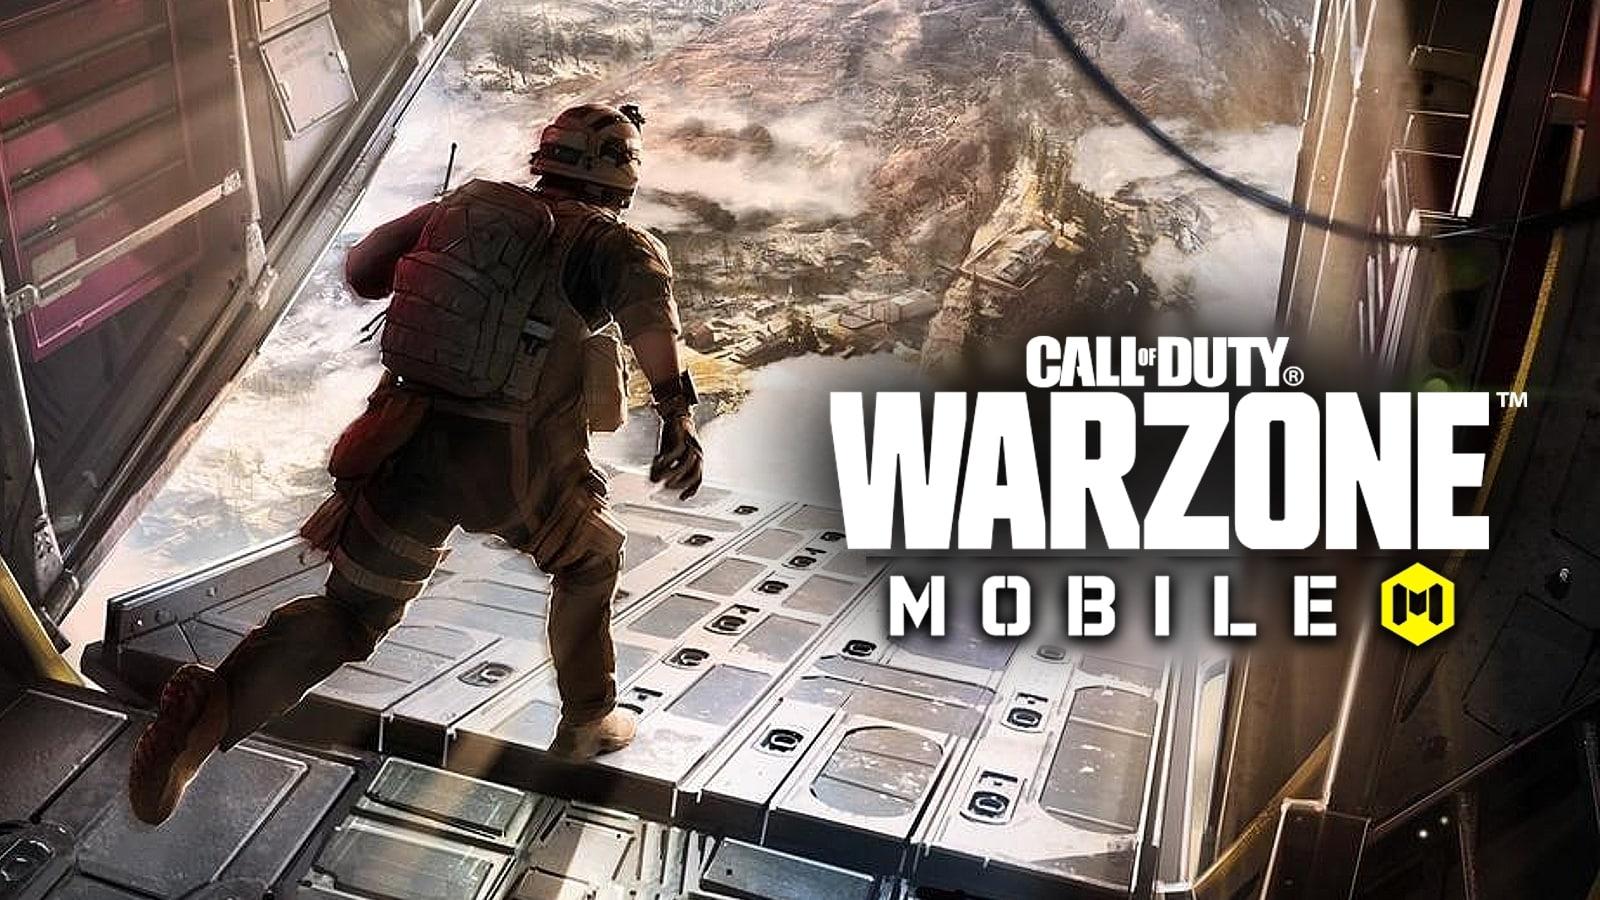 How to download Call of Duty Warzone Mobile (Limited Release)